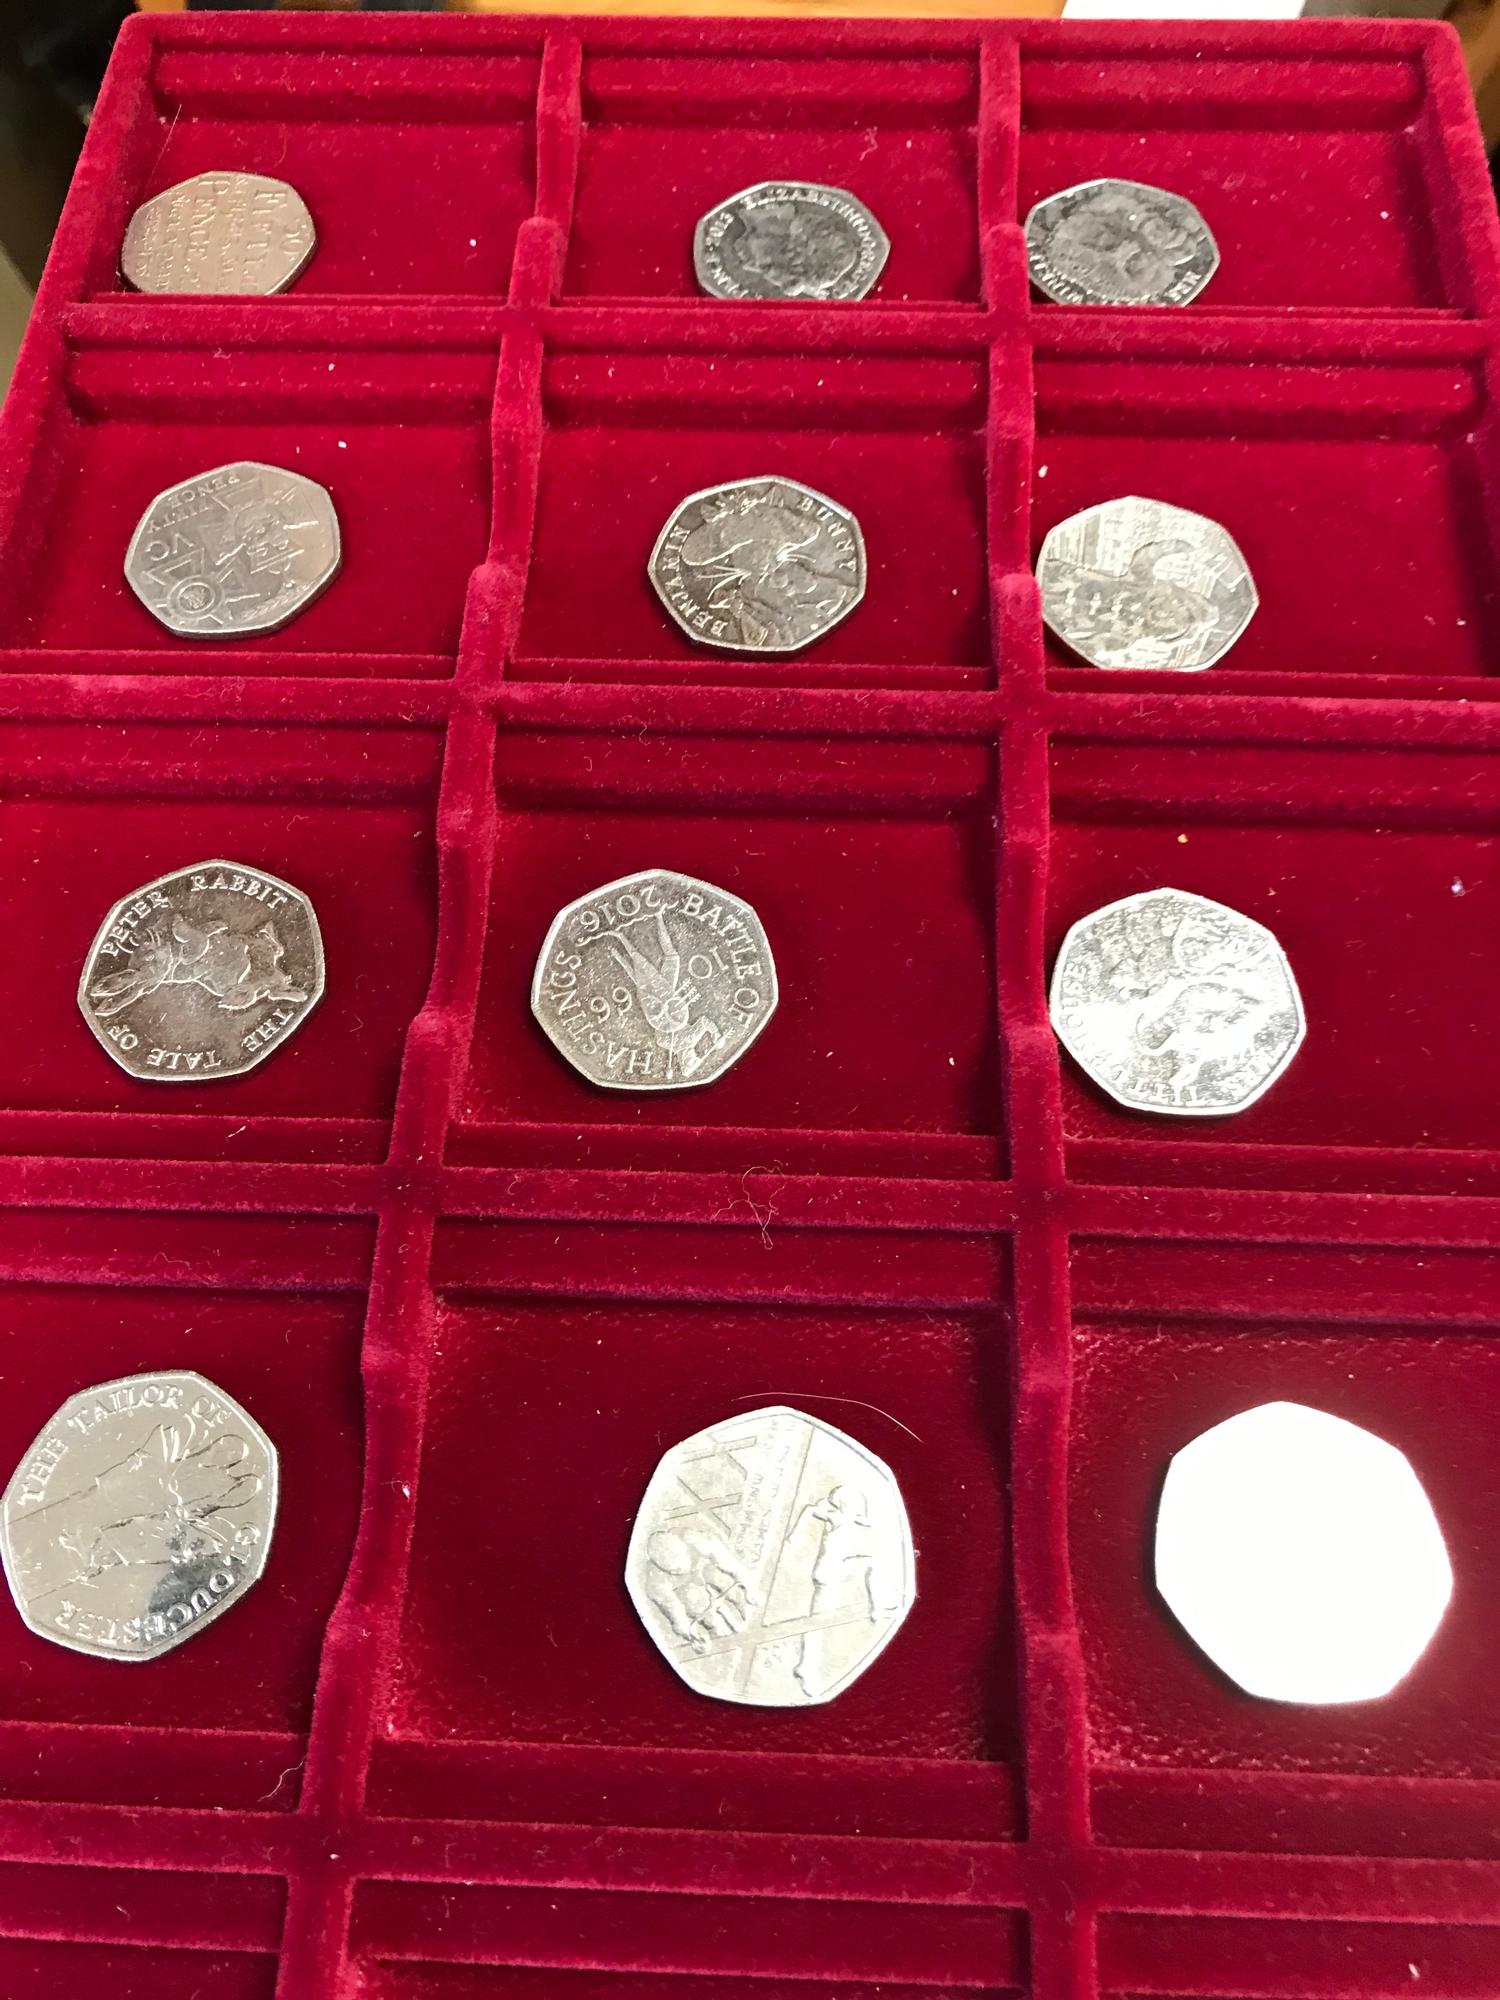 A collection of 18 '50p' coins to include Beatrix Potter, Paddington and Commemorative coins - Image 3 of 3